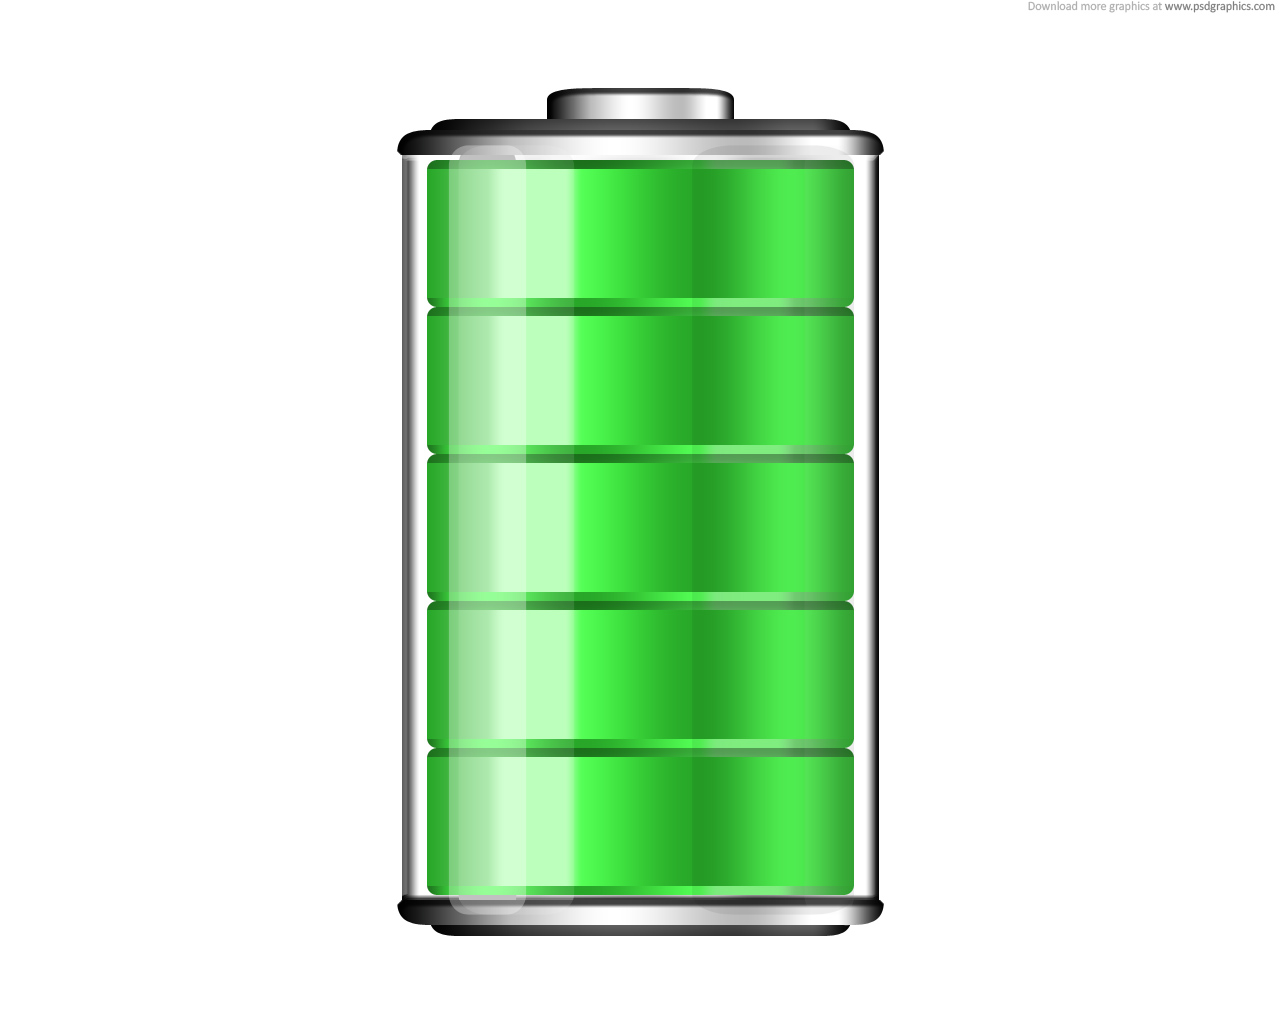 Battery levels icons | PSDGraphics